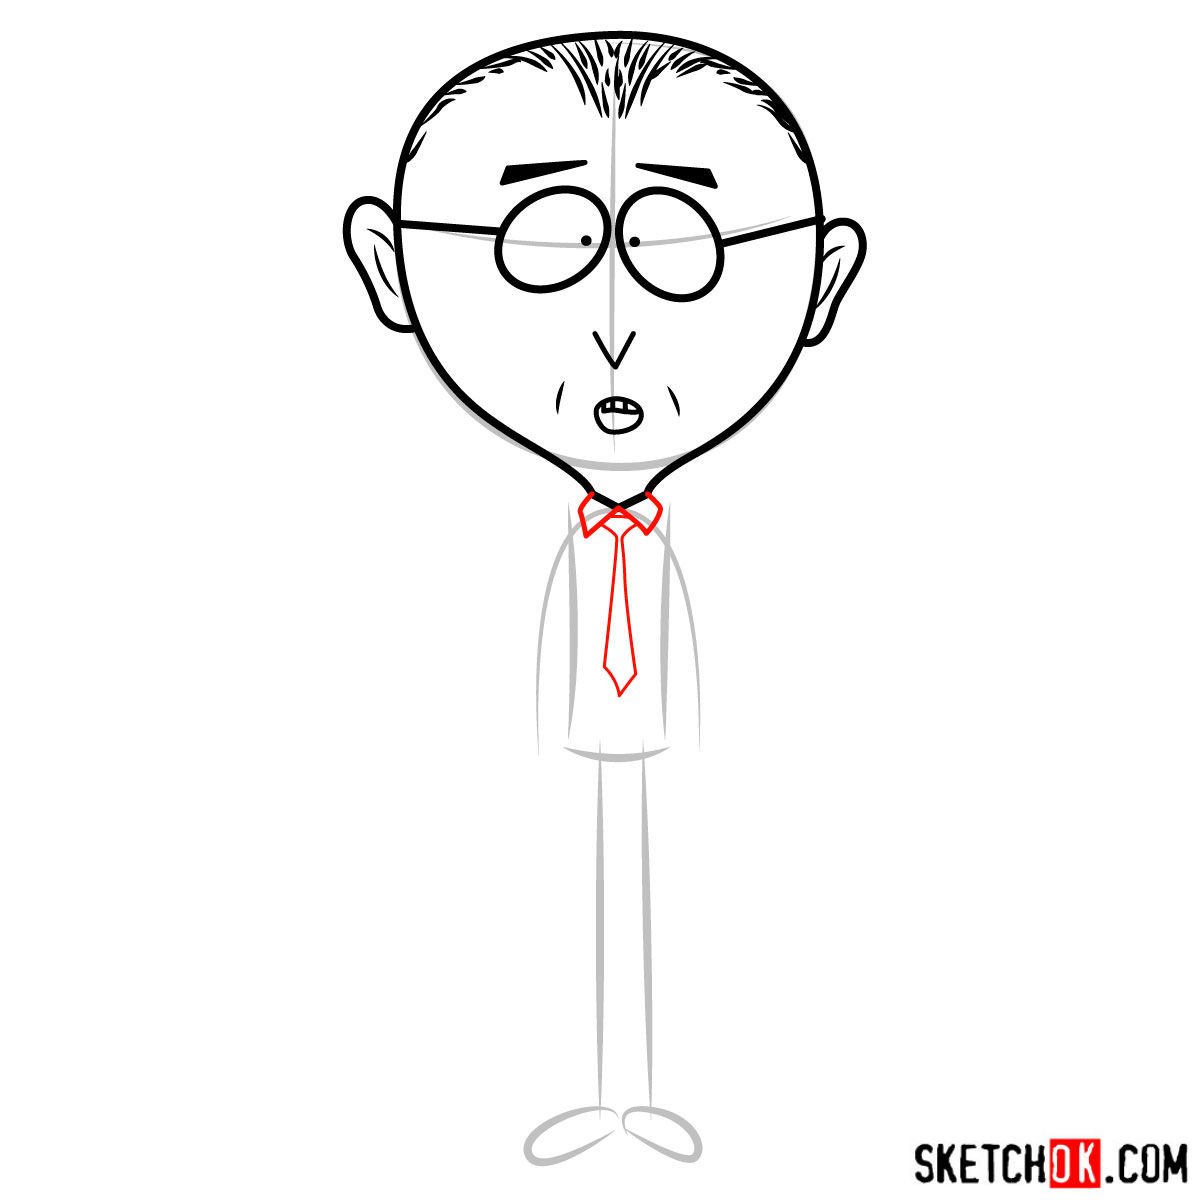 How to draw Mr. Mackey from South Park - step 04